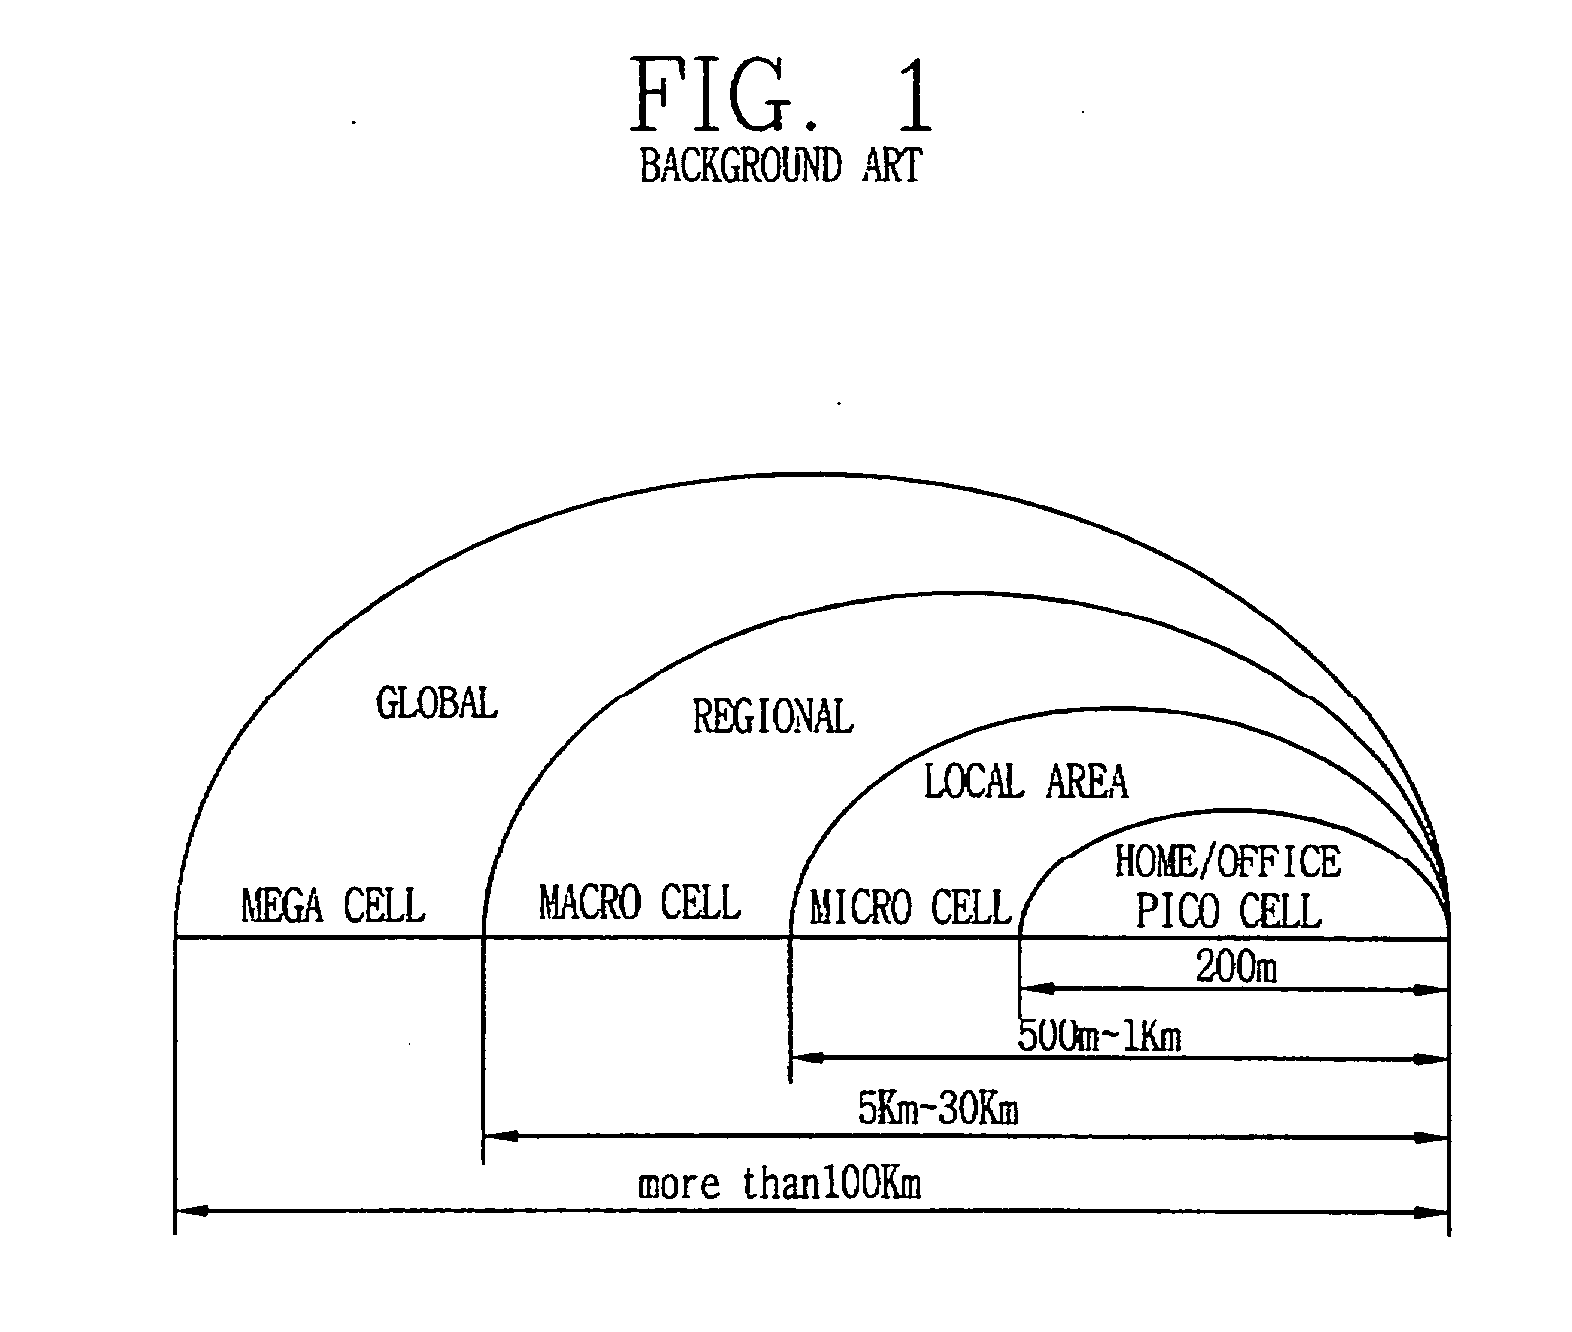 Method and apparatus for reselecting a cell in a network with the hierarchical cell structure